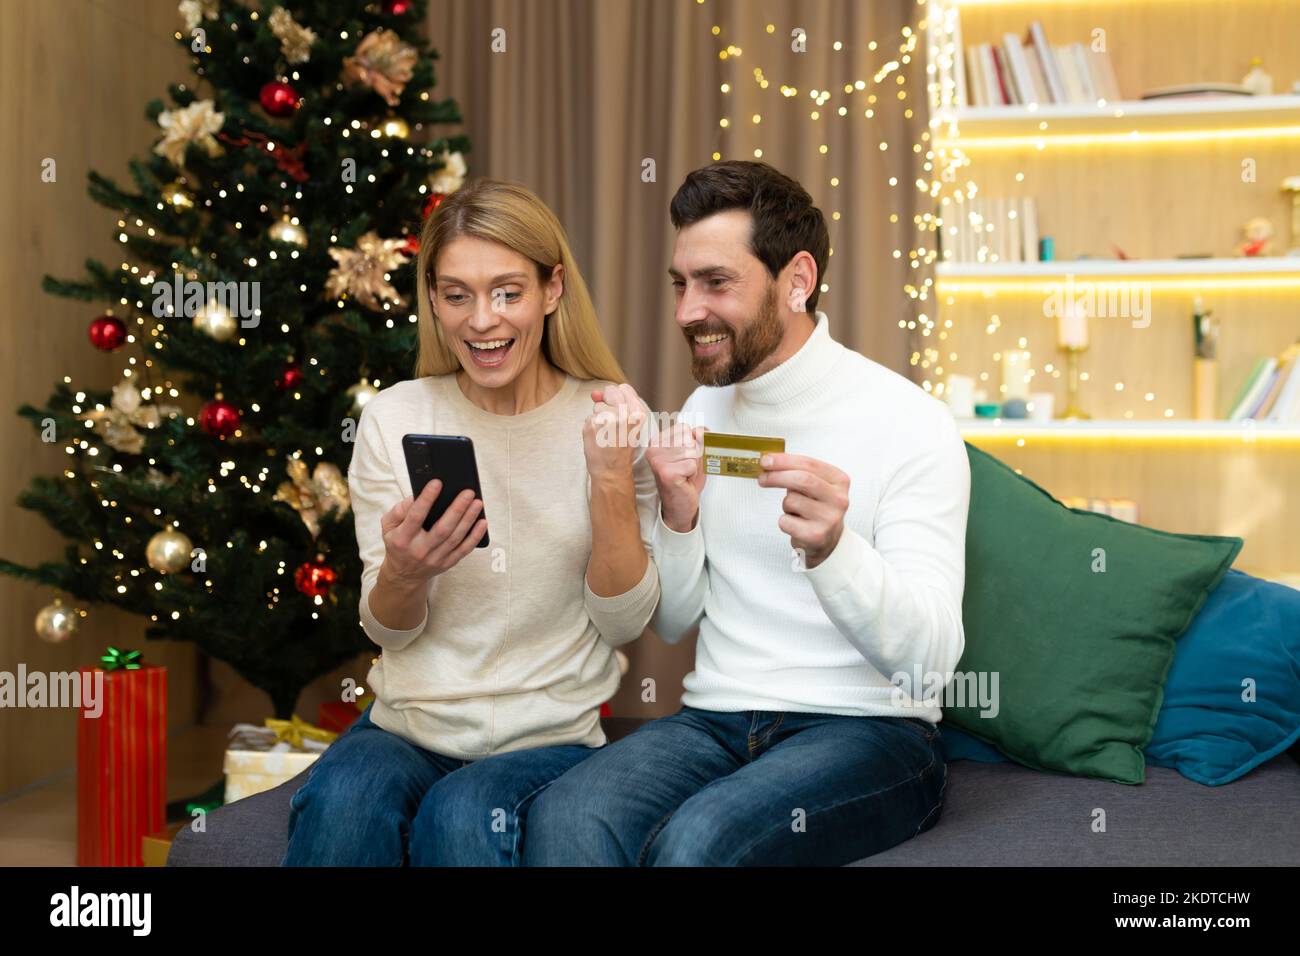 Holiday sale, online shopping. A young family, a couple, a man and a woman at home near the Christmas tree hold a phone and a credit card, rejoice at a successful profitable purchase, a discount. Stock Photo